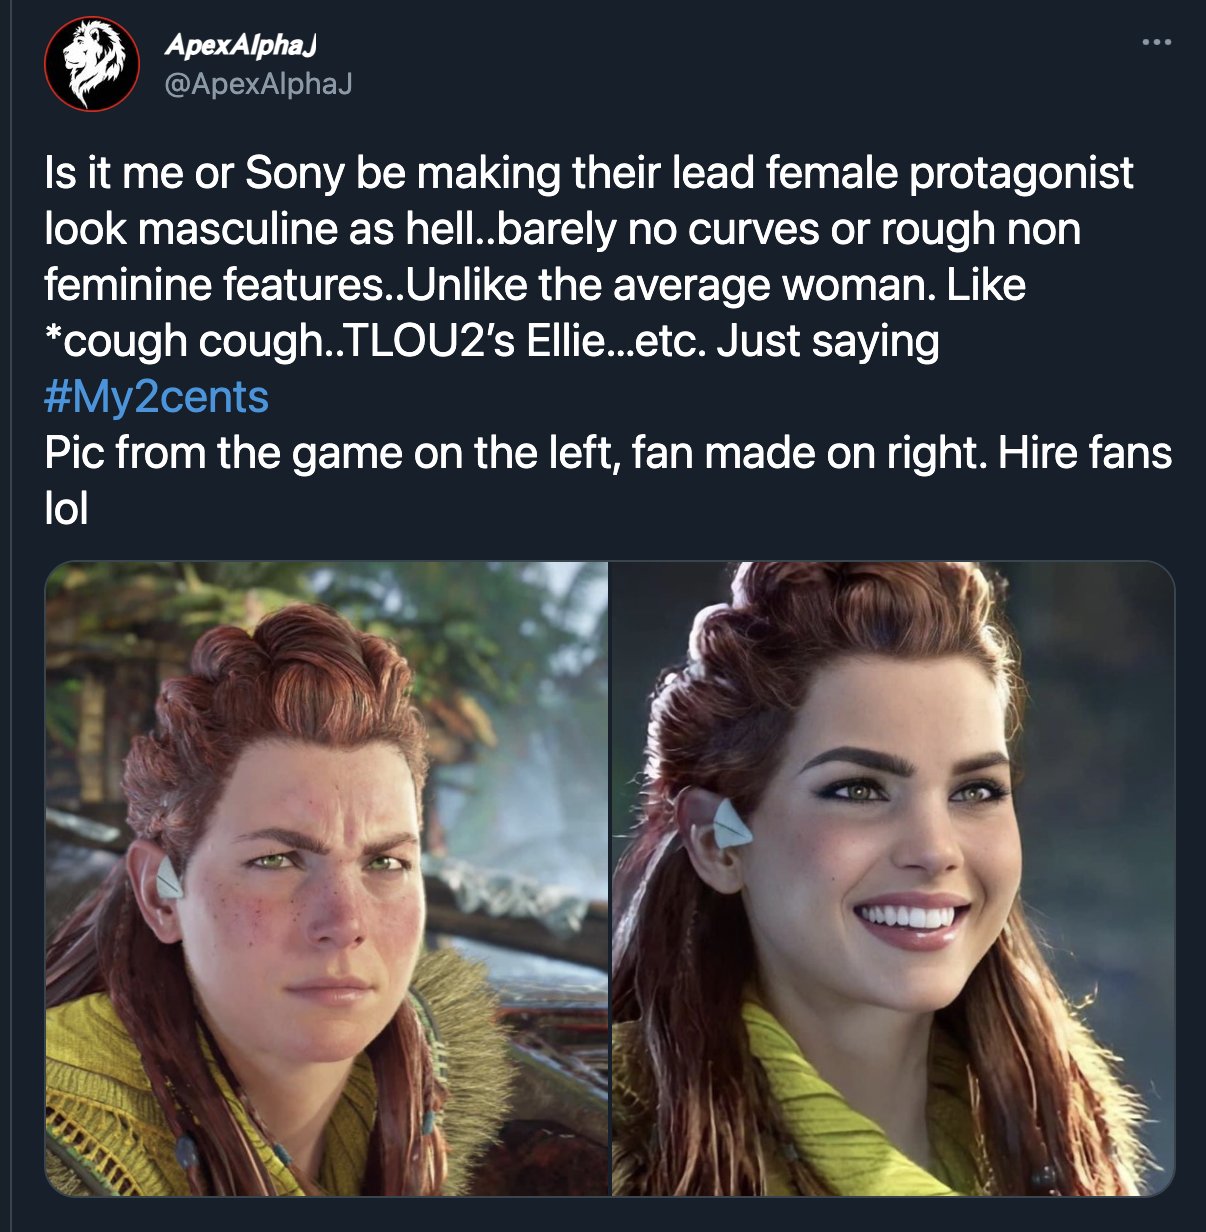 funny gaming memes - smile - ApexAlpha Is it me or Sony be making their lead female protagonist look masculine as hell..barely no curves or rough non feminine features.. Un the average woman. cough cough..TLOU2's Ellie...etc. Just saying Pic from the game